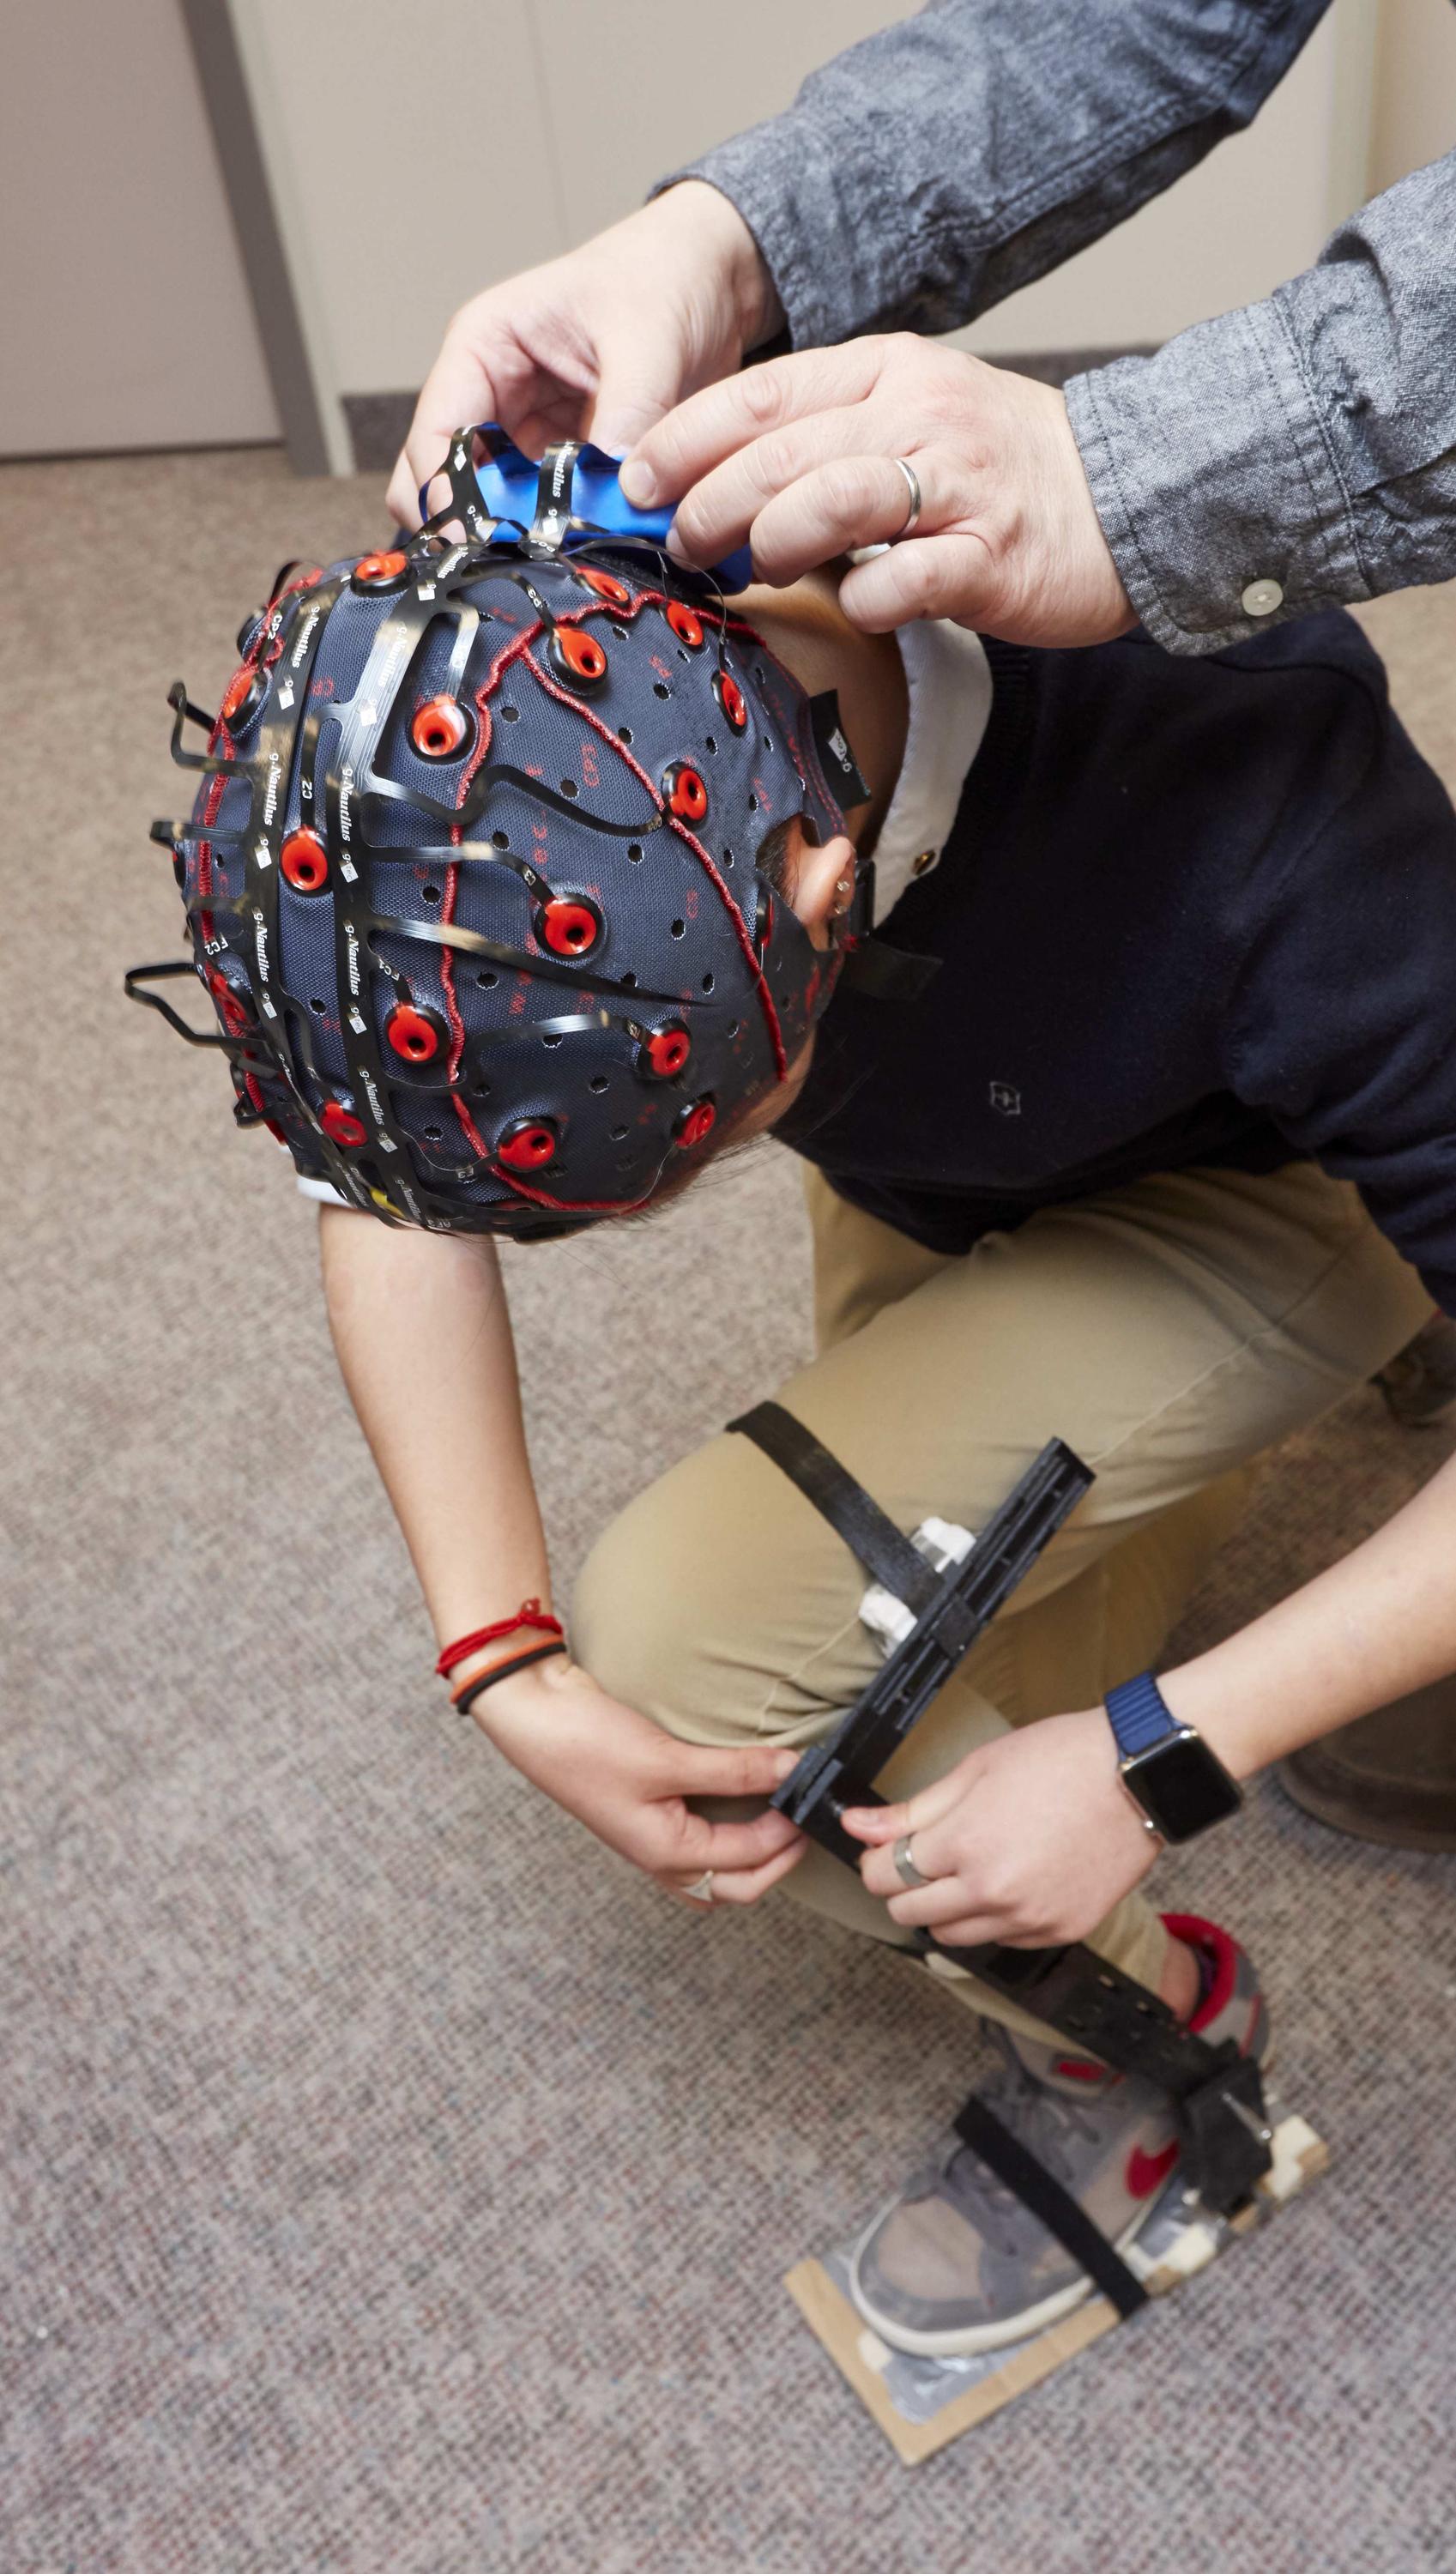 BCI and exoskeleton for parkinson's patients